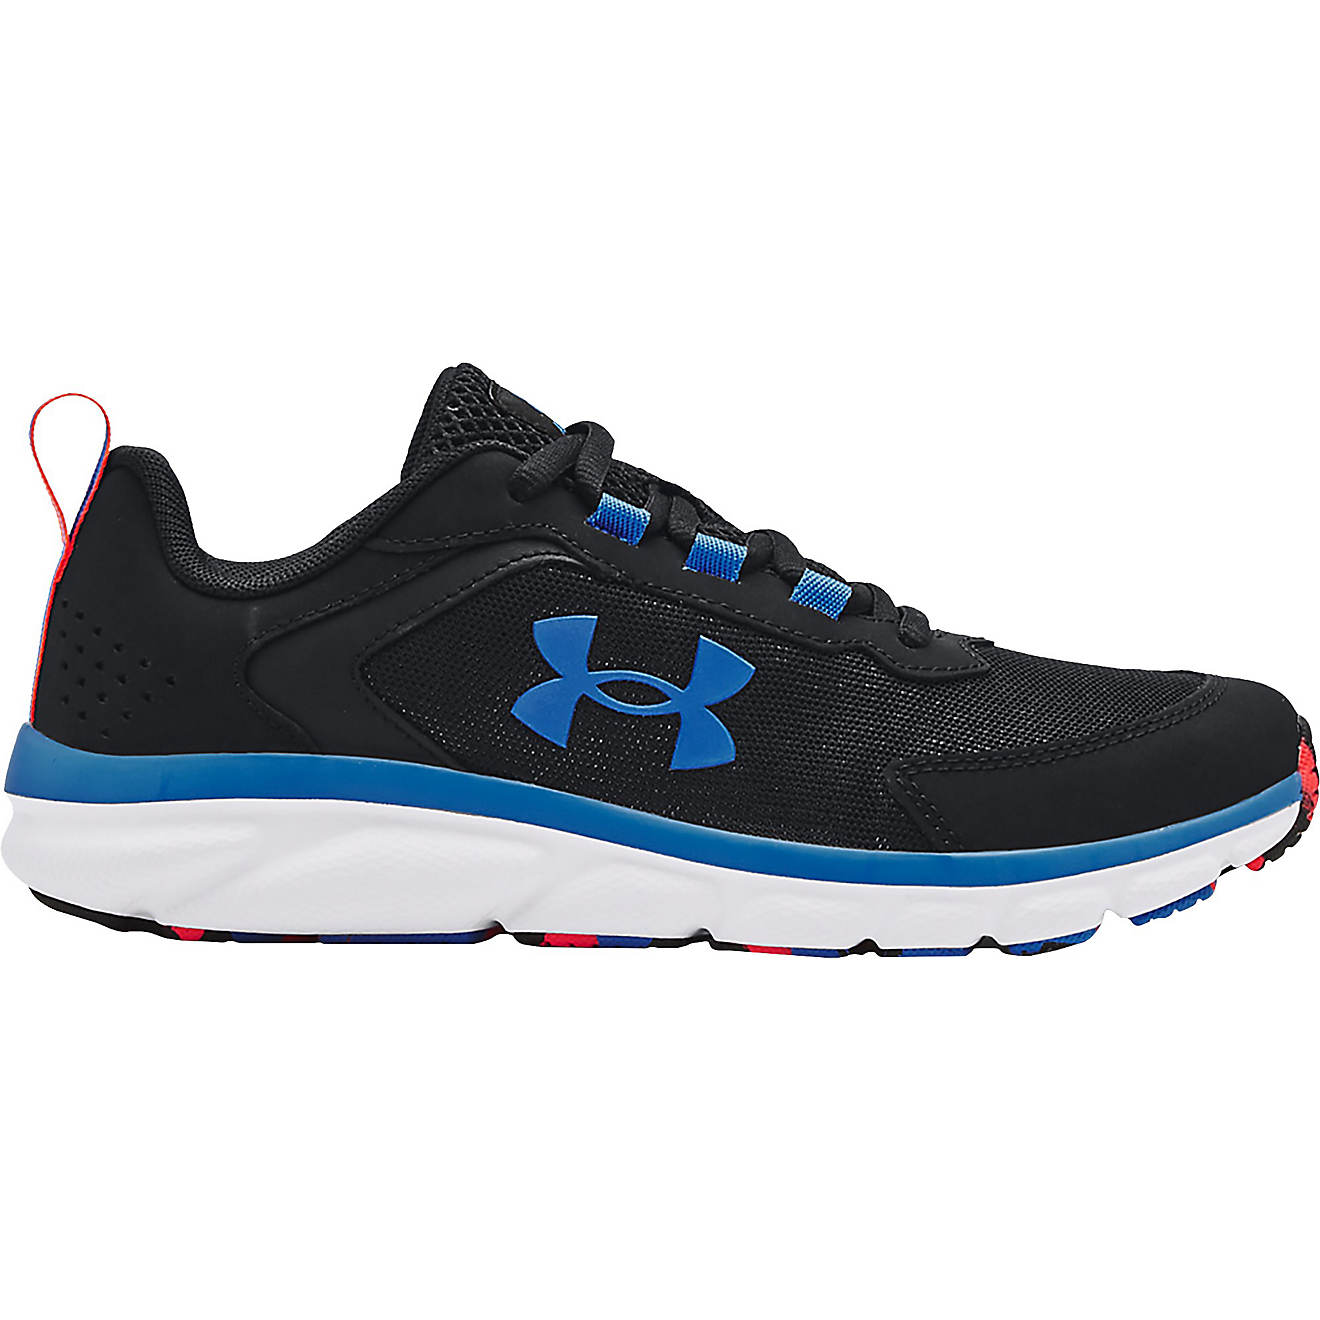 Under Armour Boys' Grade School Assert 9 Running Shoes on Sale At Academy Sports + Outdoors